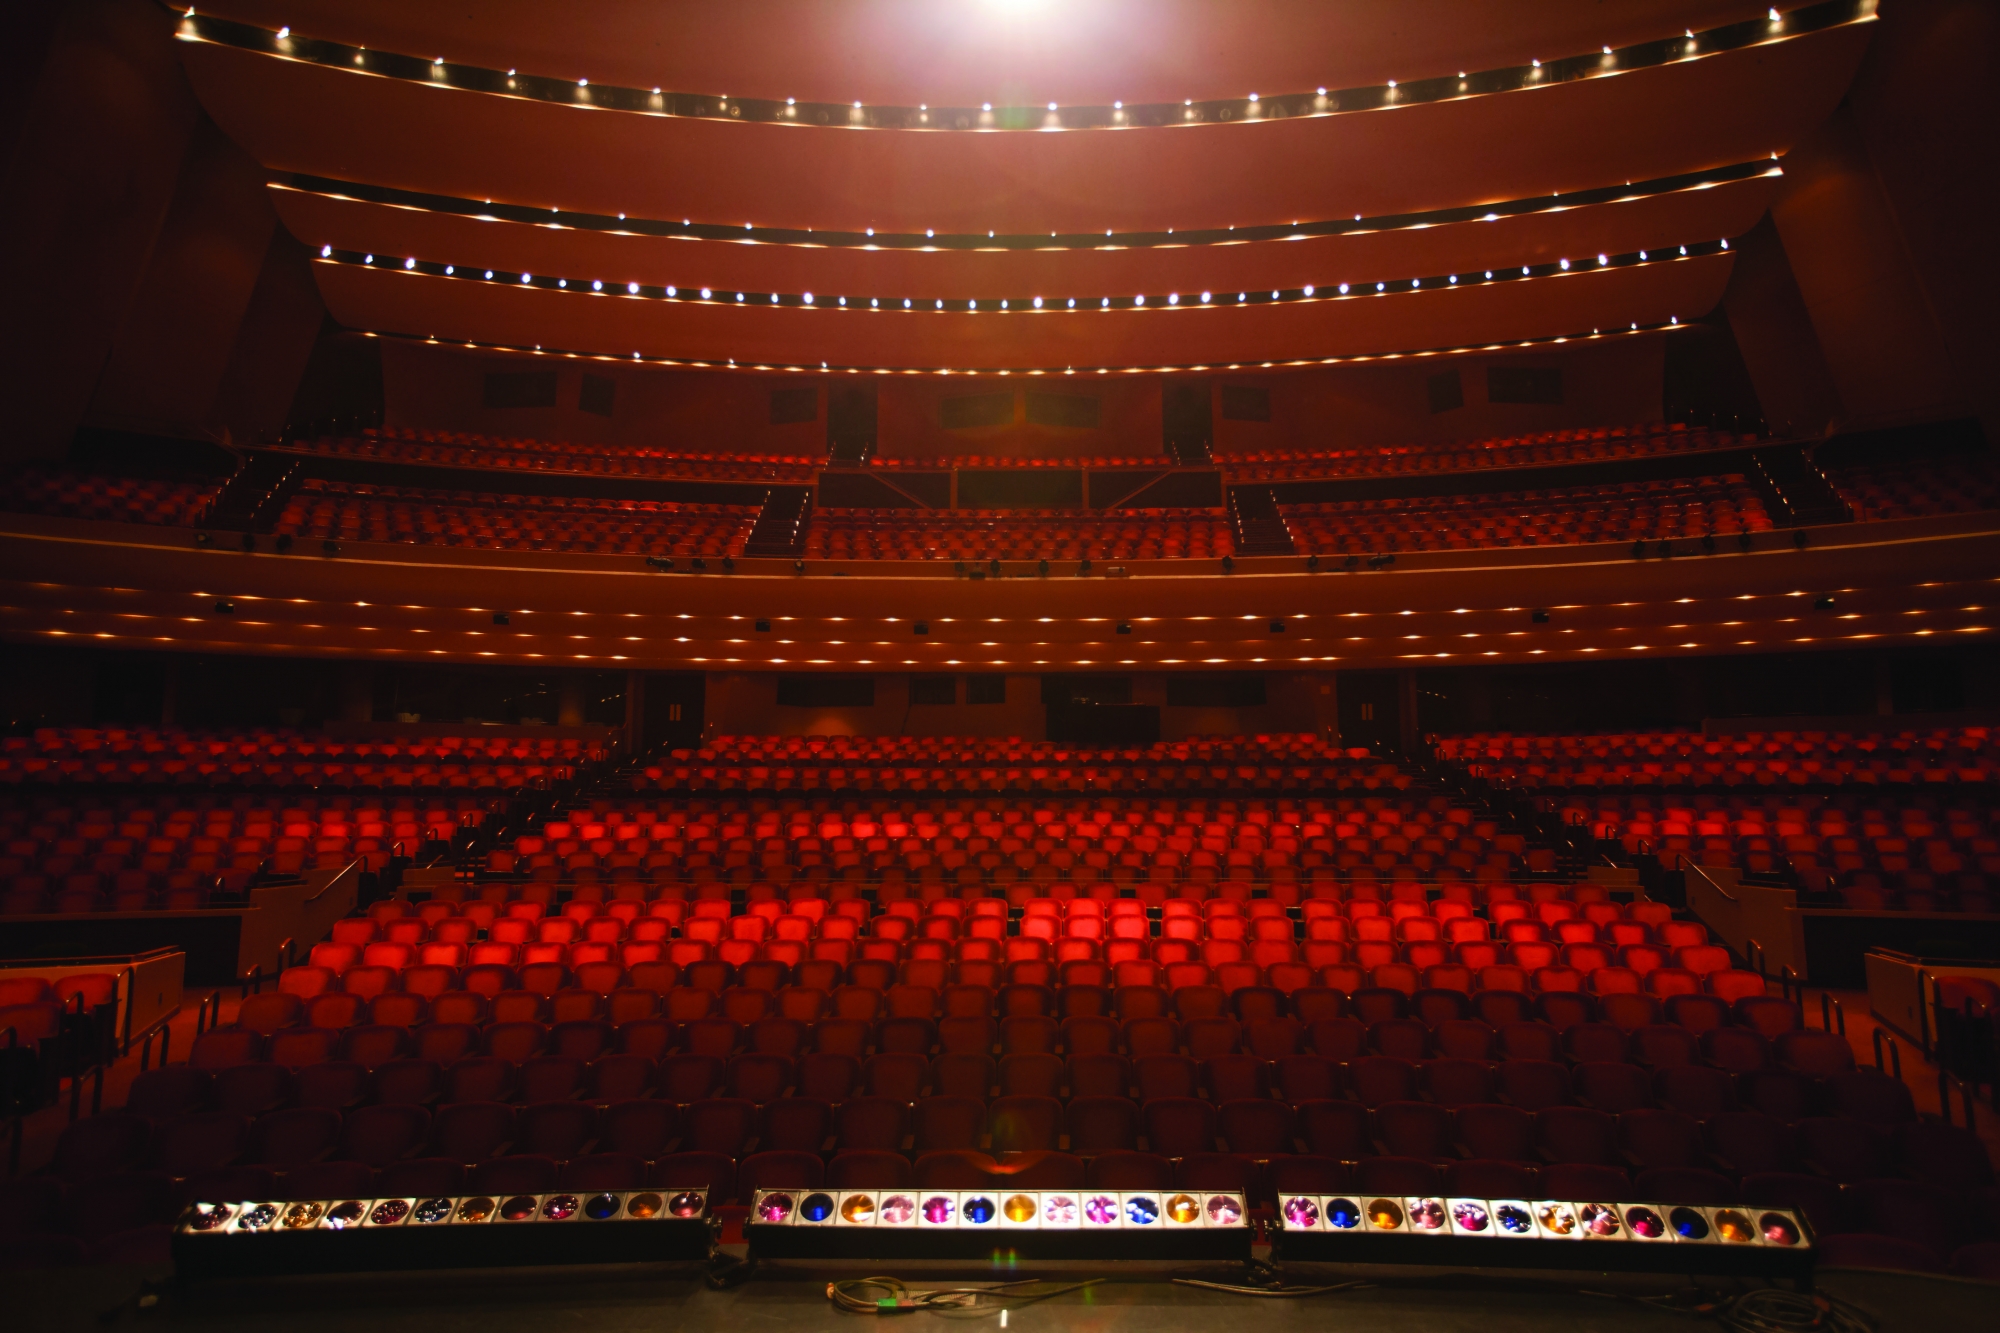 Image of the Lied Center auditorium taken from the stage looking out into an empty hall full of red, plush seats.